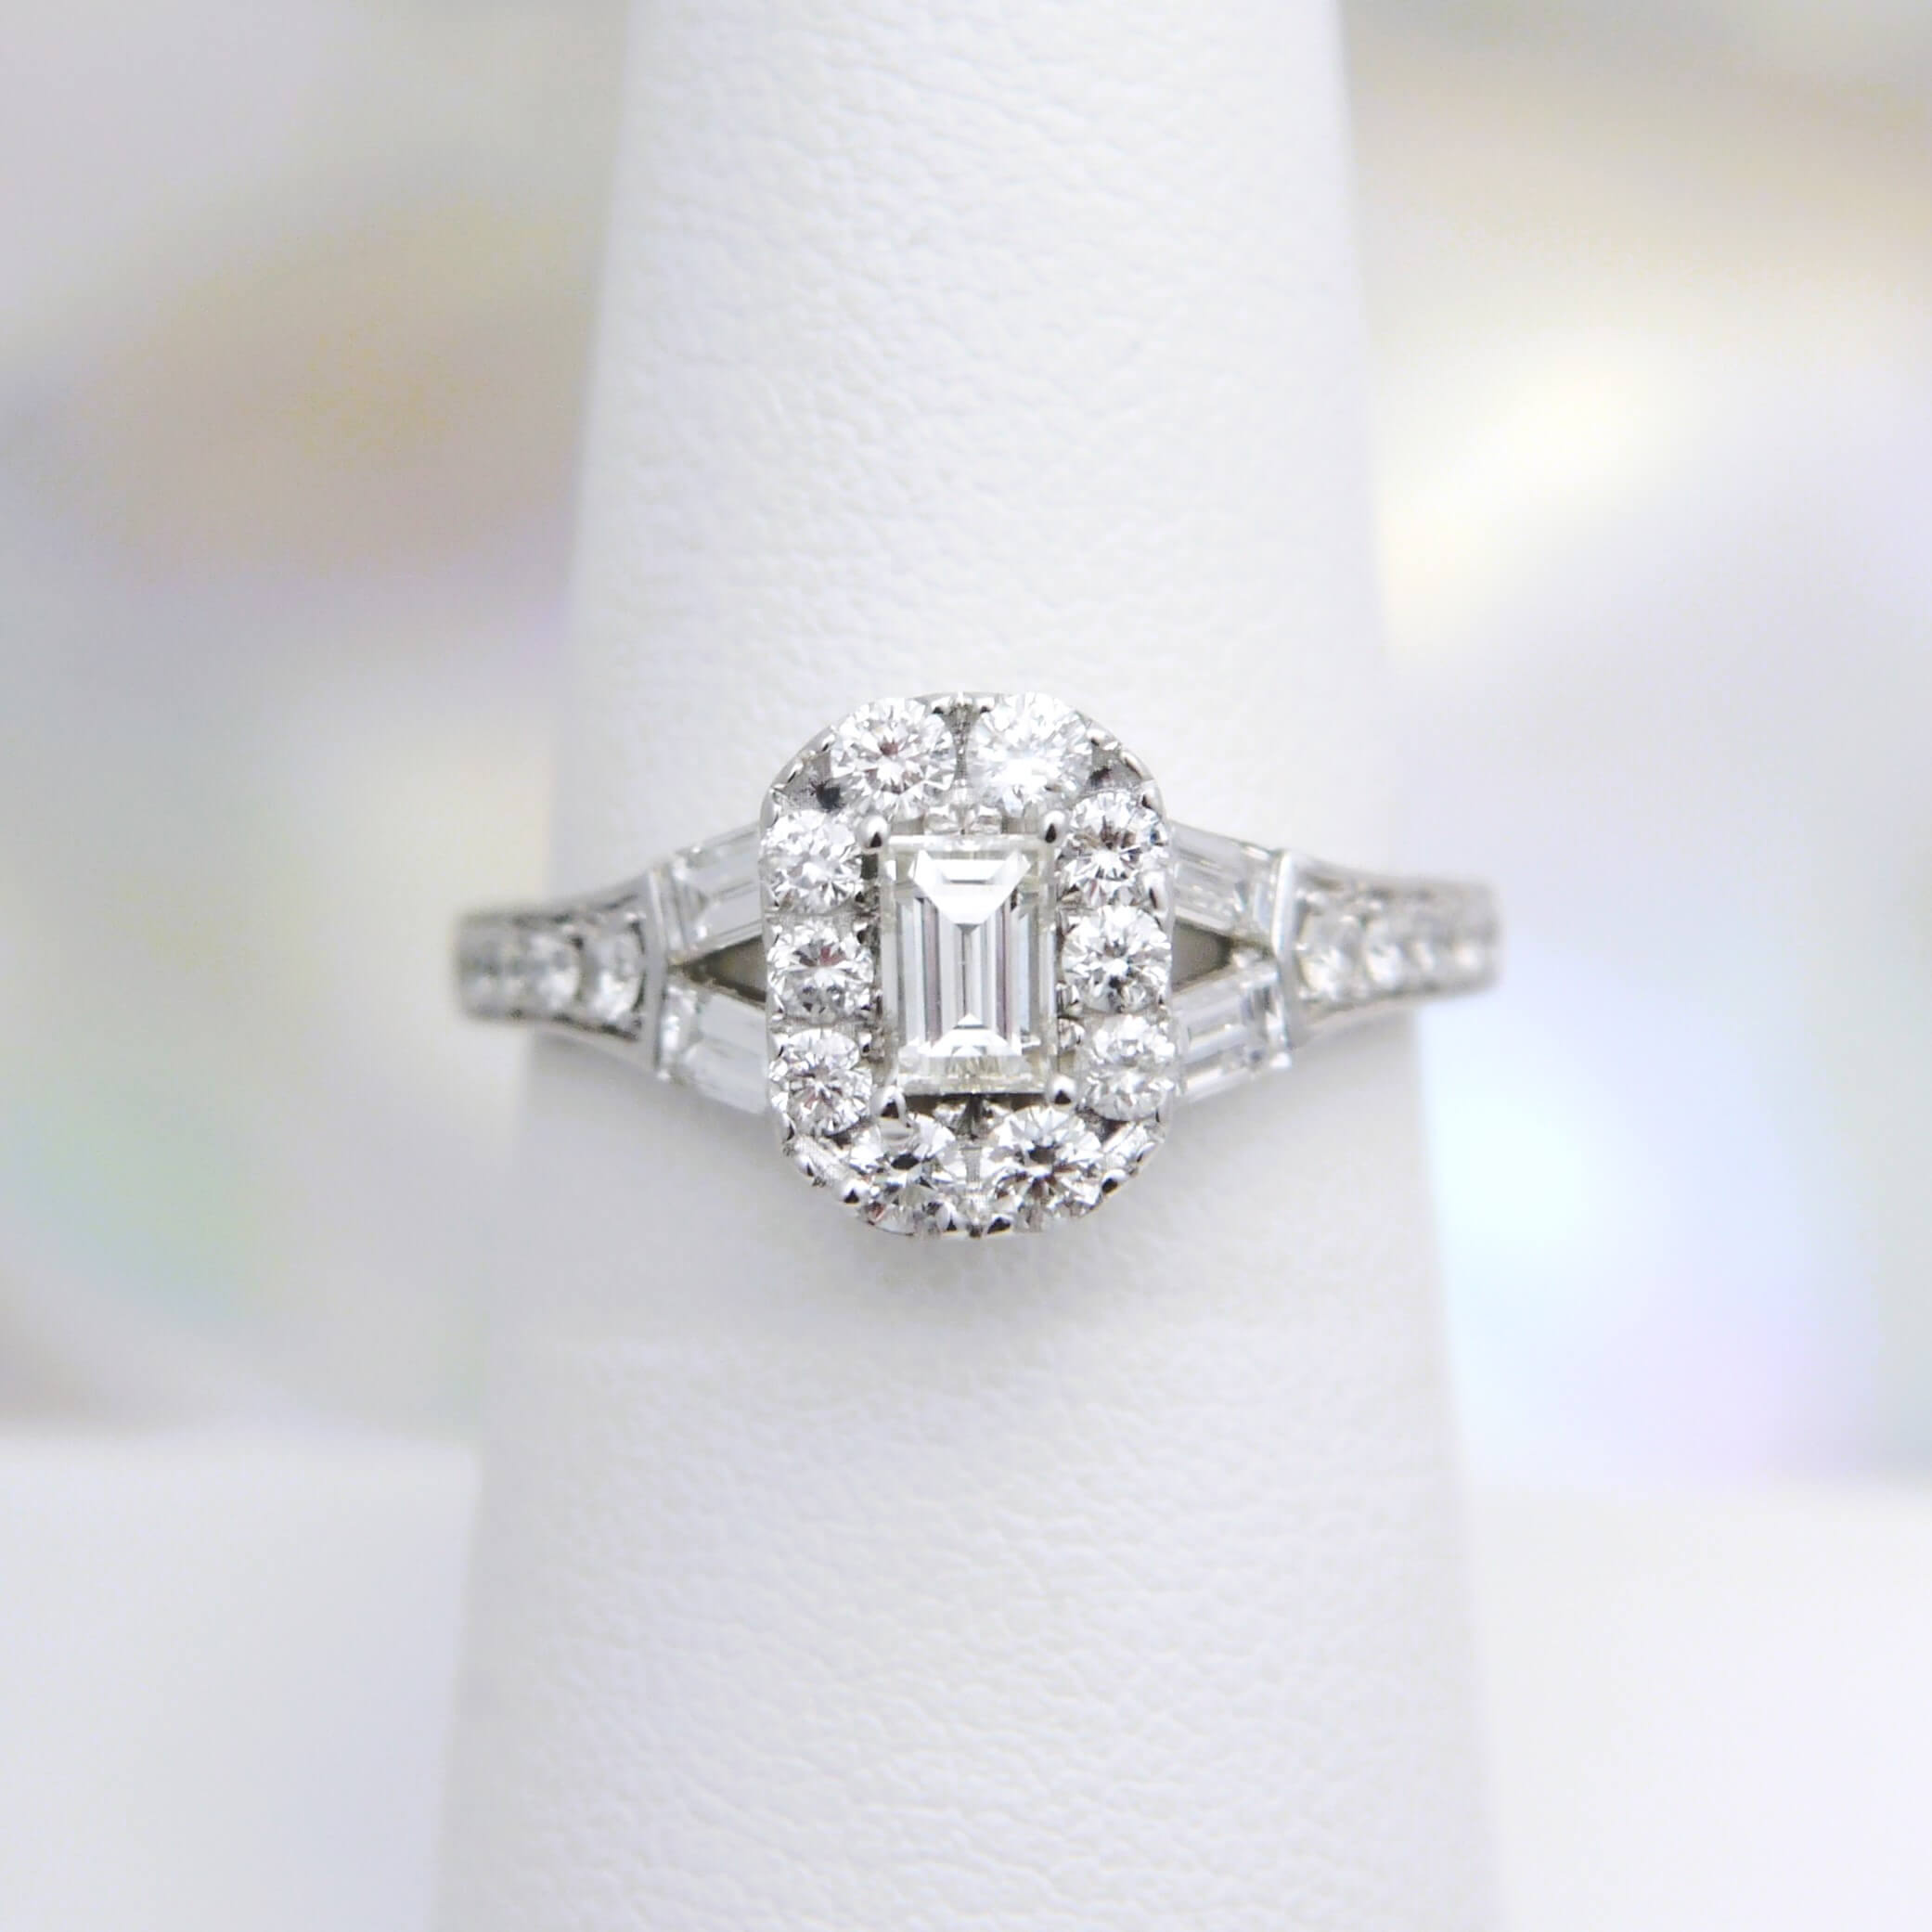 18k (1.44 ct) Emerald Cut Diamond and Diamond Halo Engagement Ring in White Gold